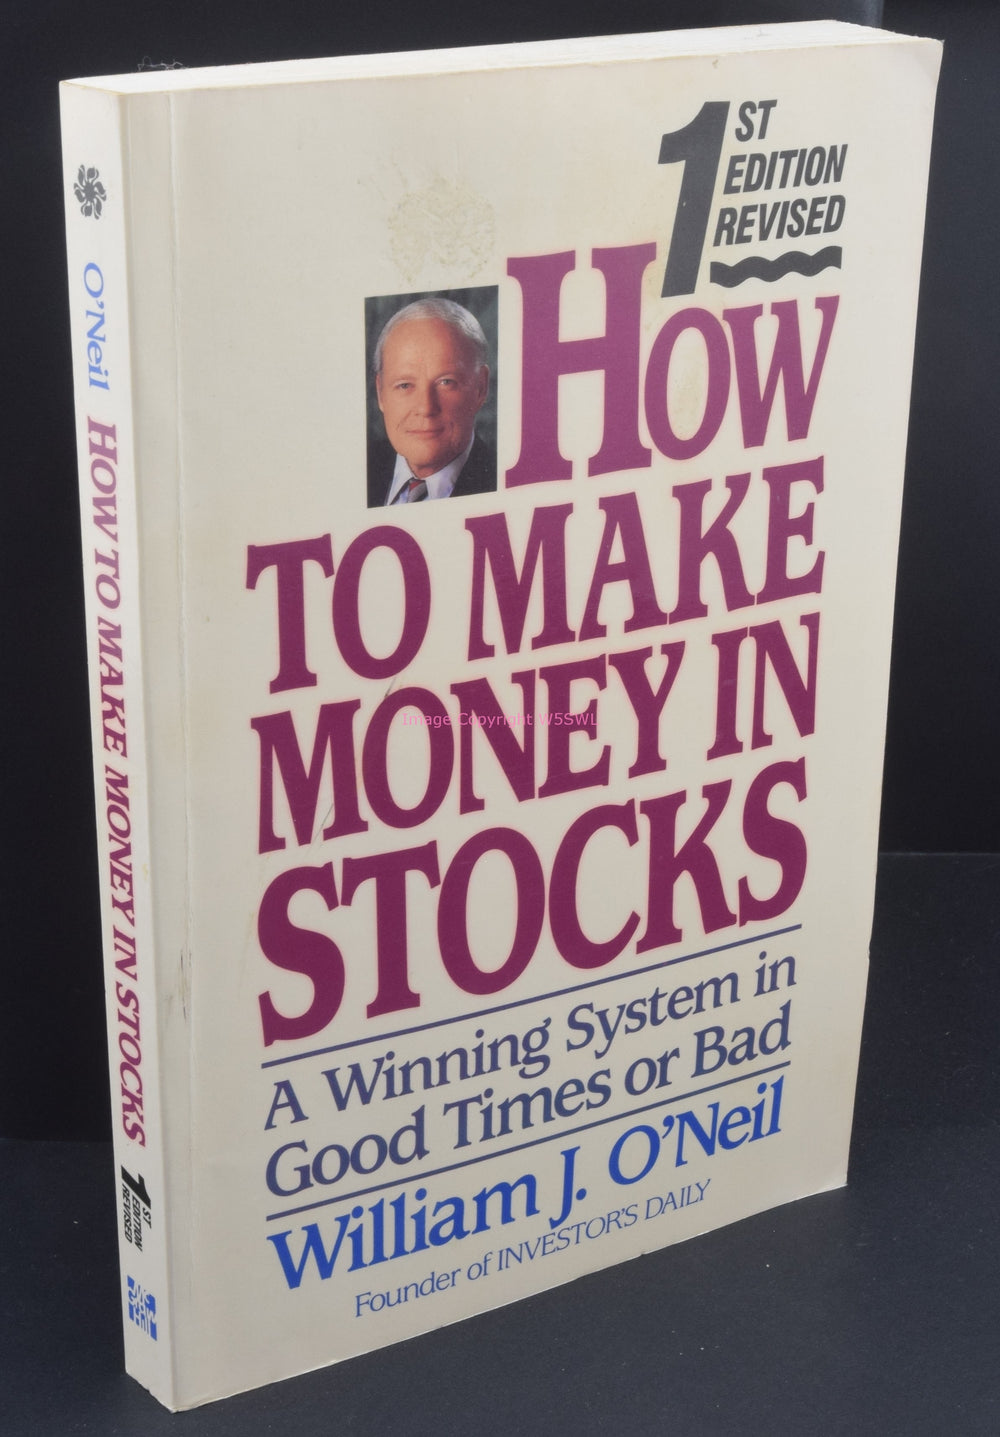 How To Make Money In Stocks 1St Edition Revised William J O'Neil - Dave's Hobby Shop by W5SWL